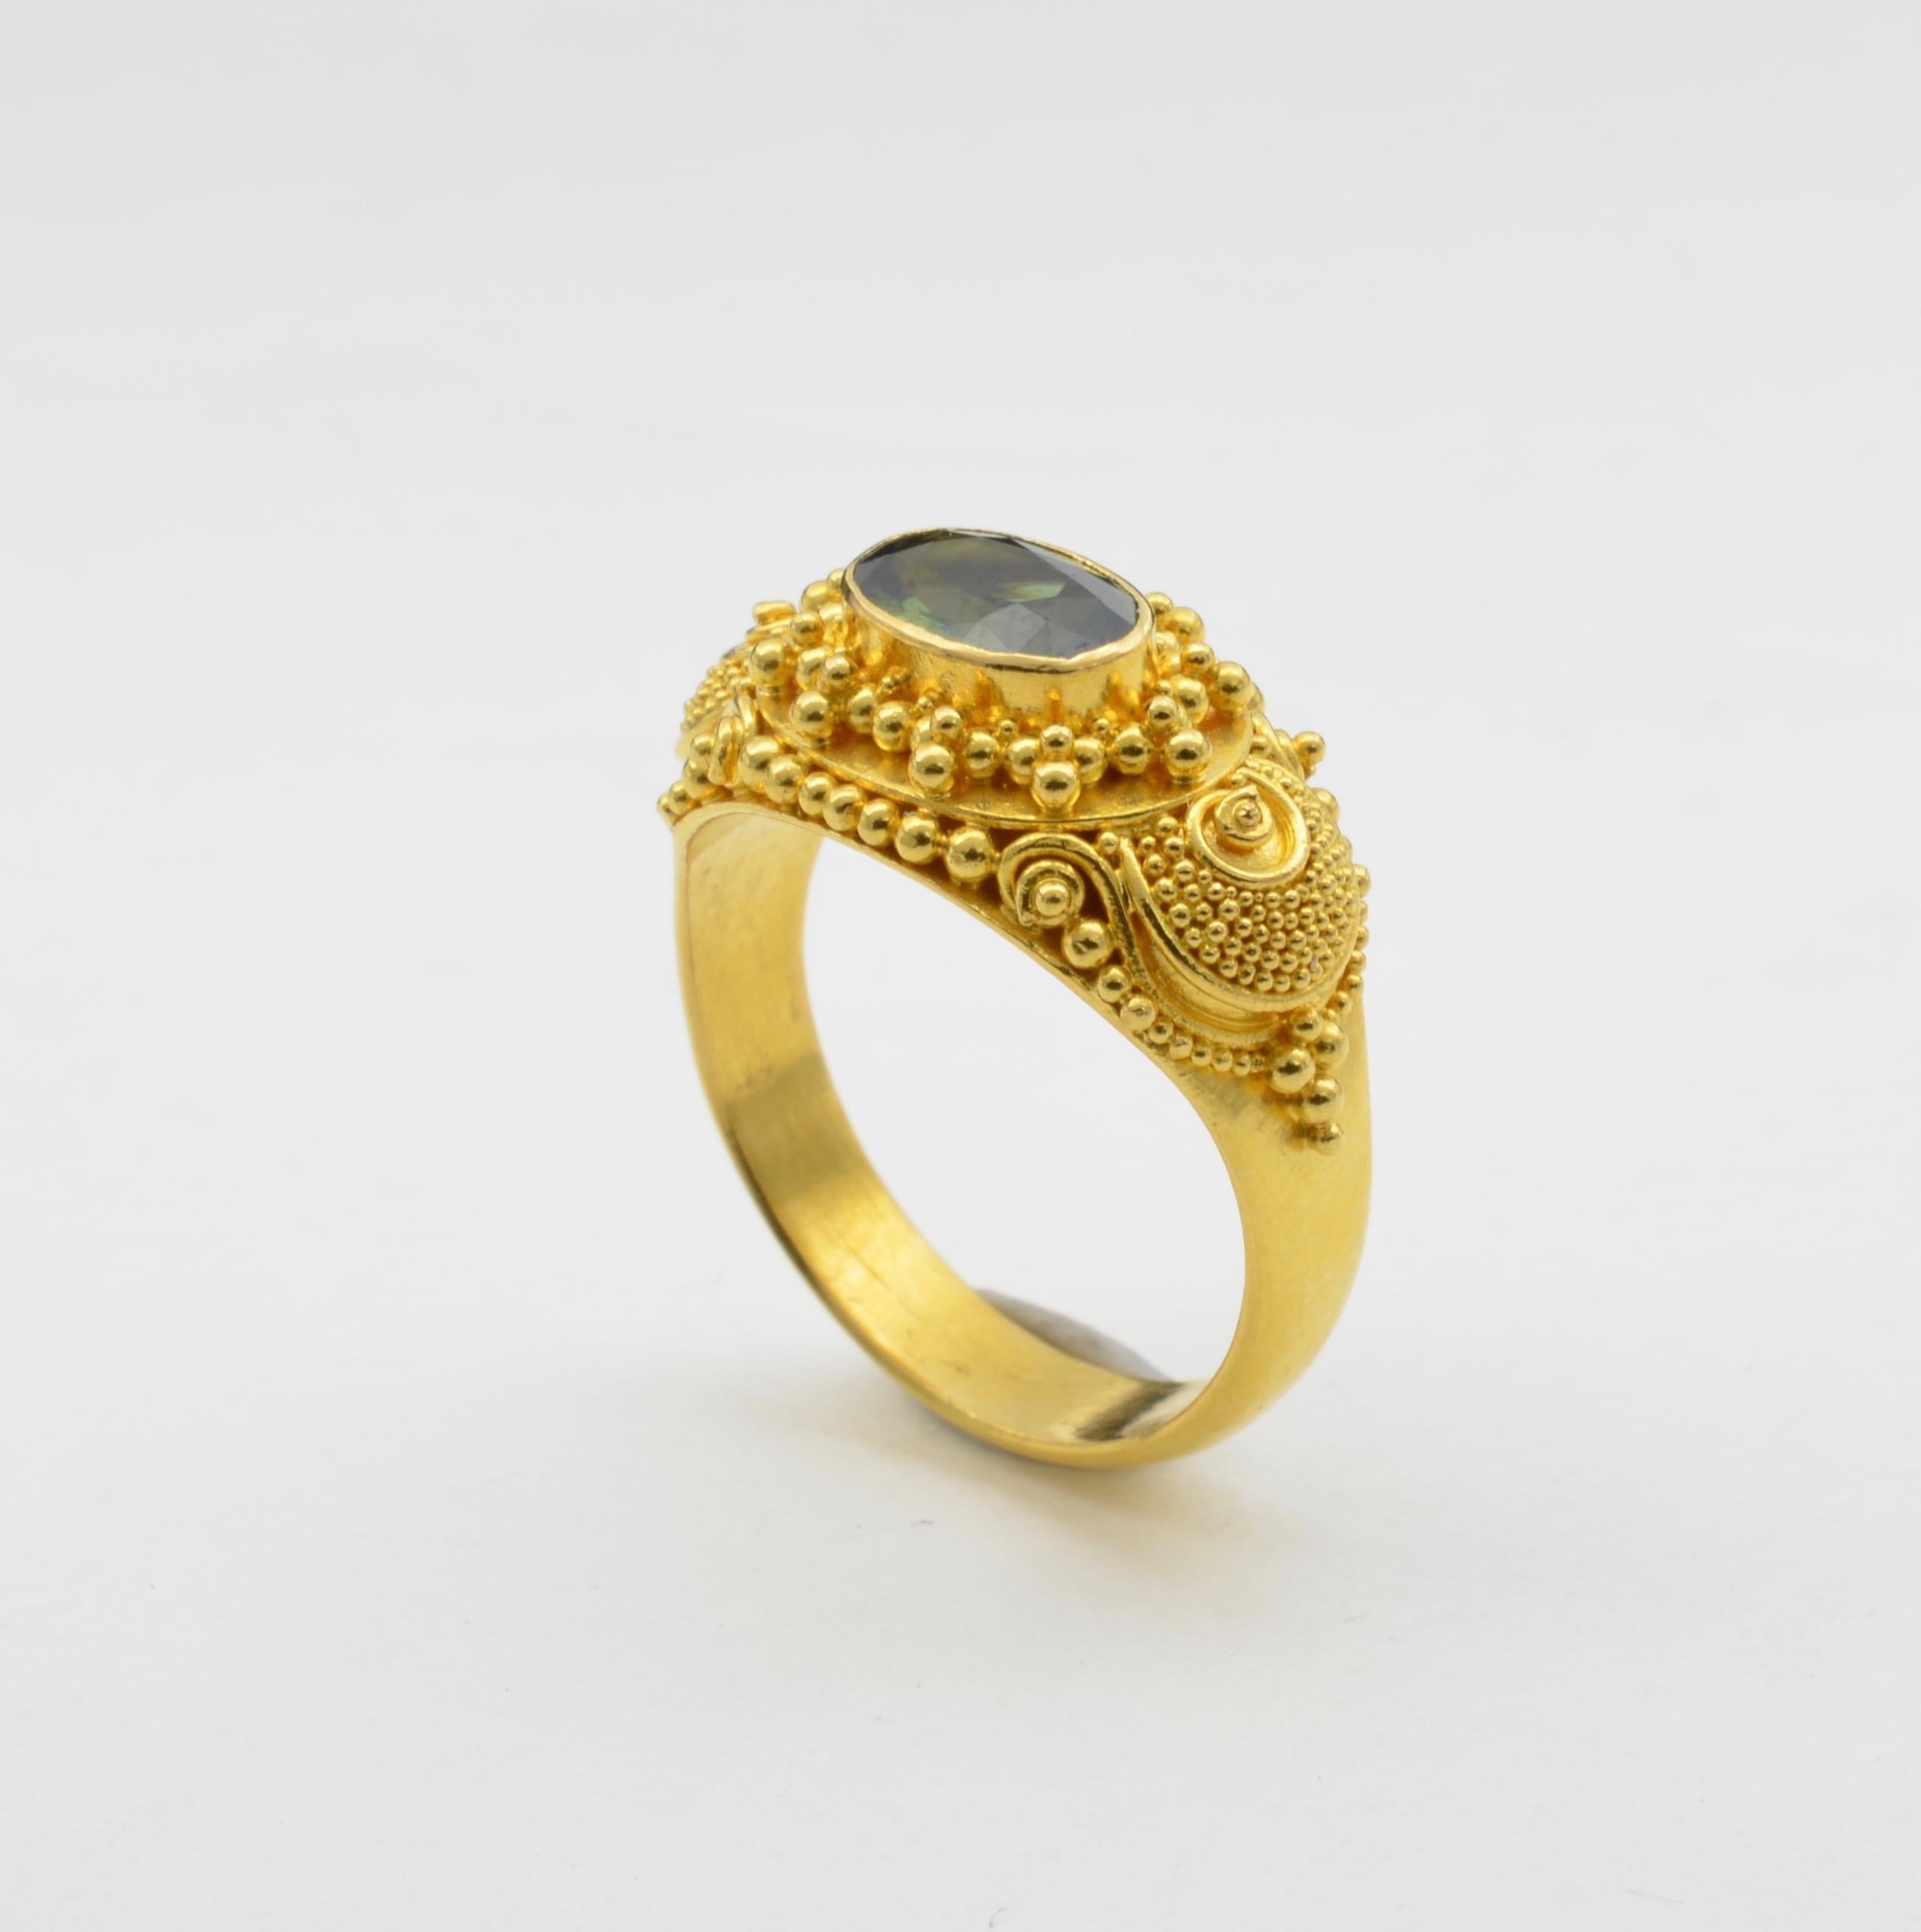 Intricate detail and spirals swirl around this deep green faceted tourmaline ring. Set in high carat 22K yellow gold this ring makes a statement fit for the Maharaja. Royal, regal and bright, the yellow gold glows in classical Indian fashion with